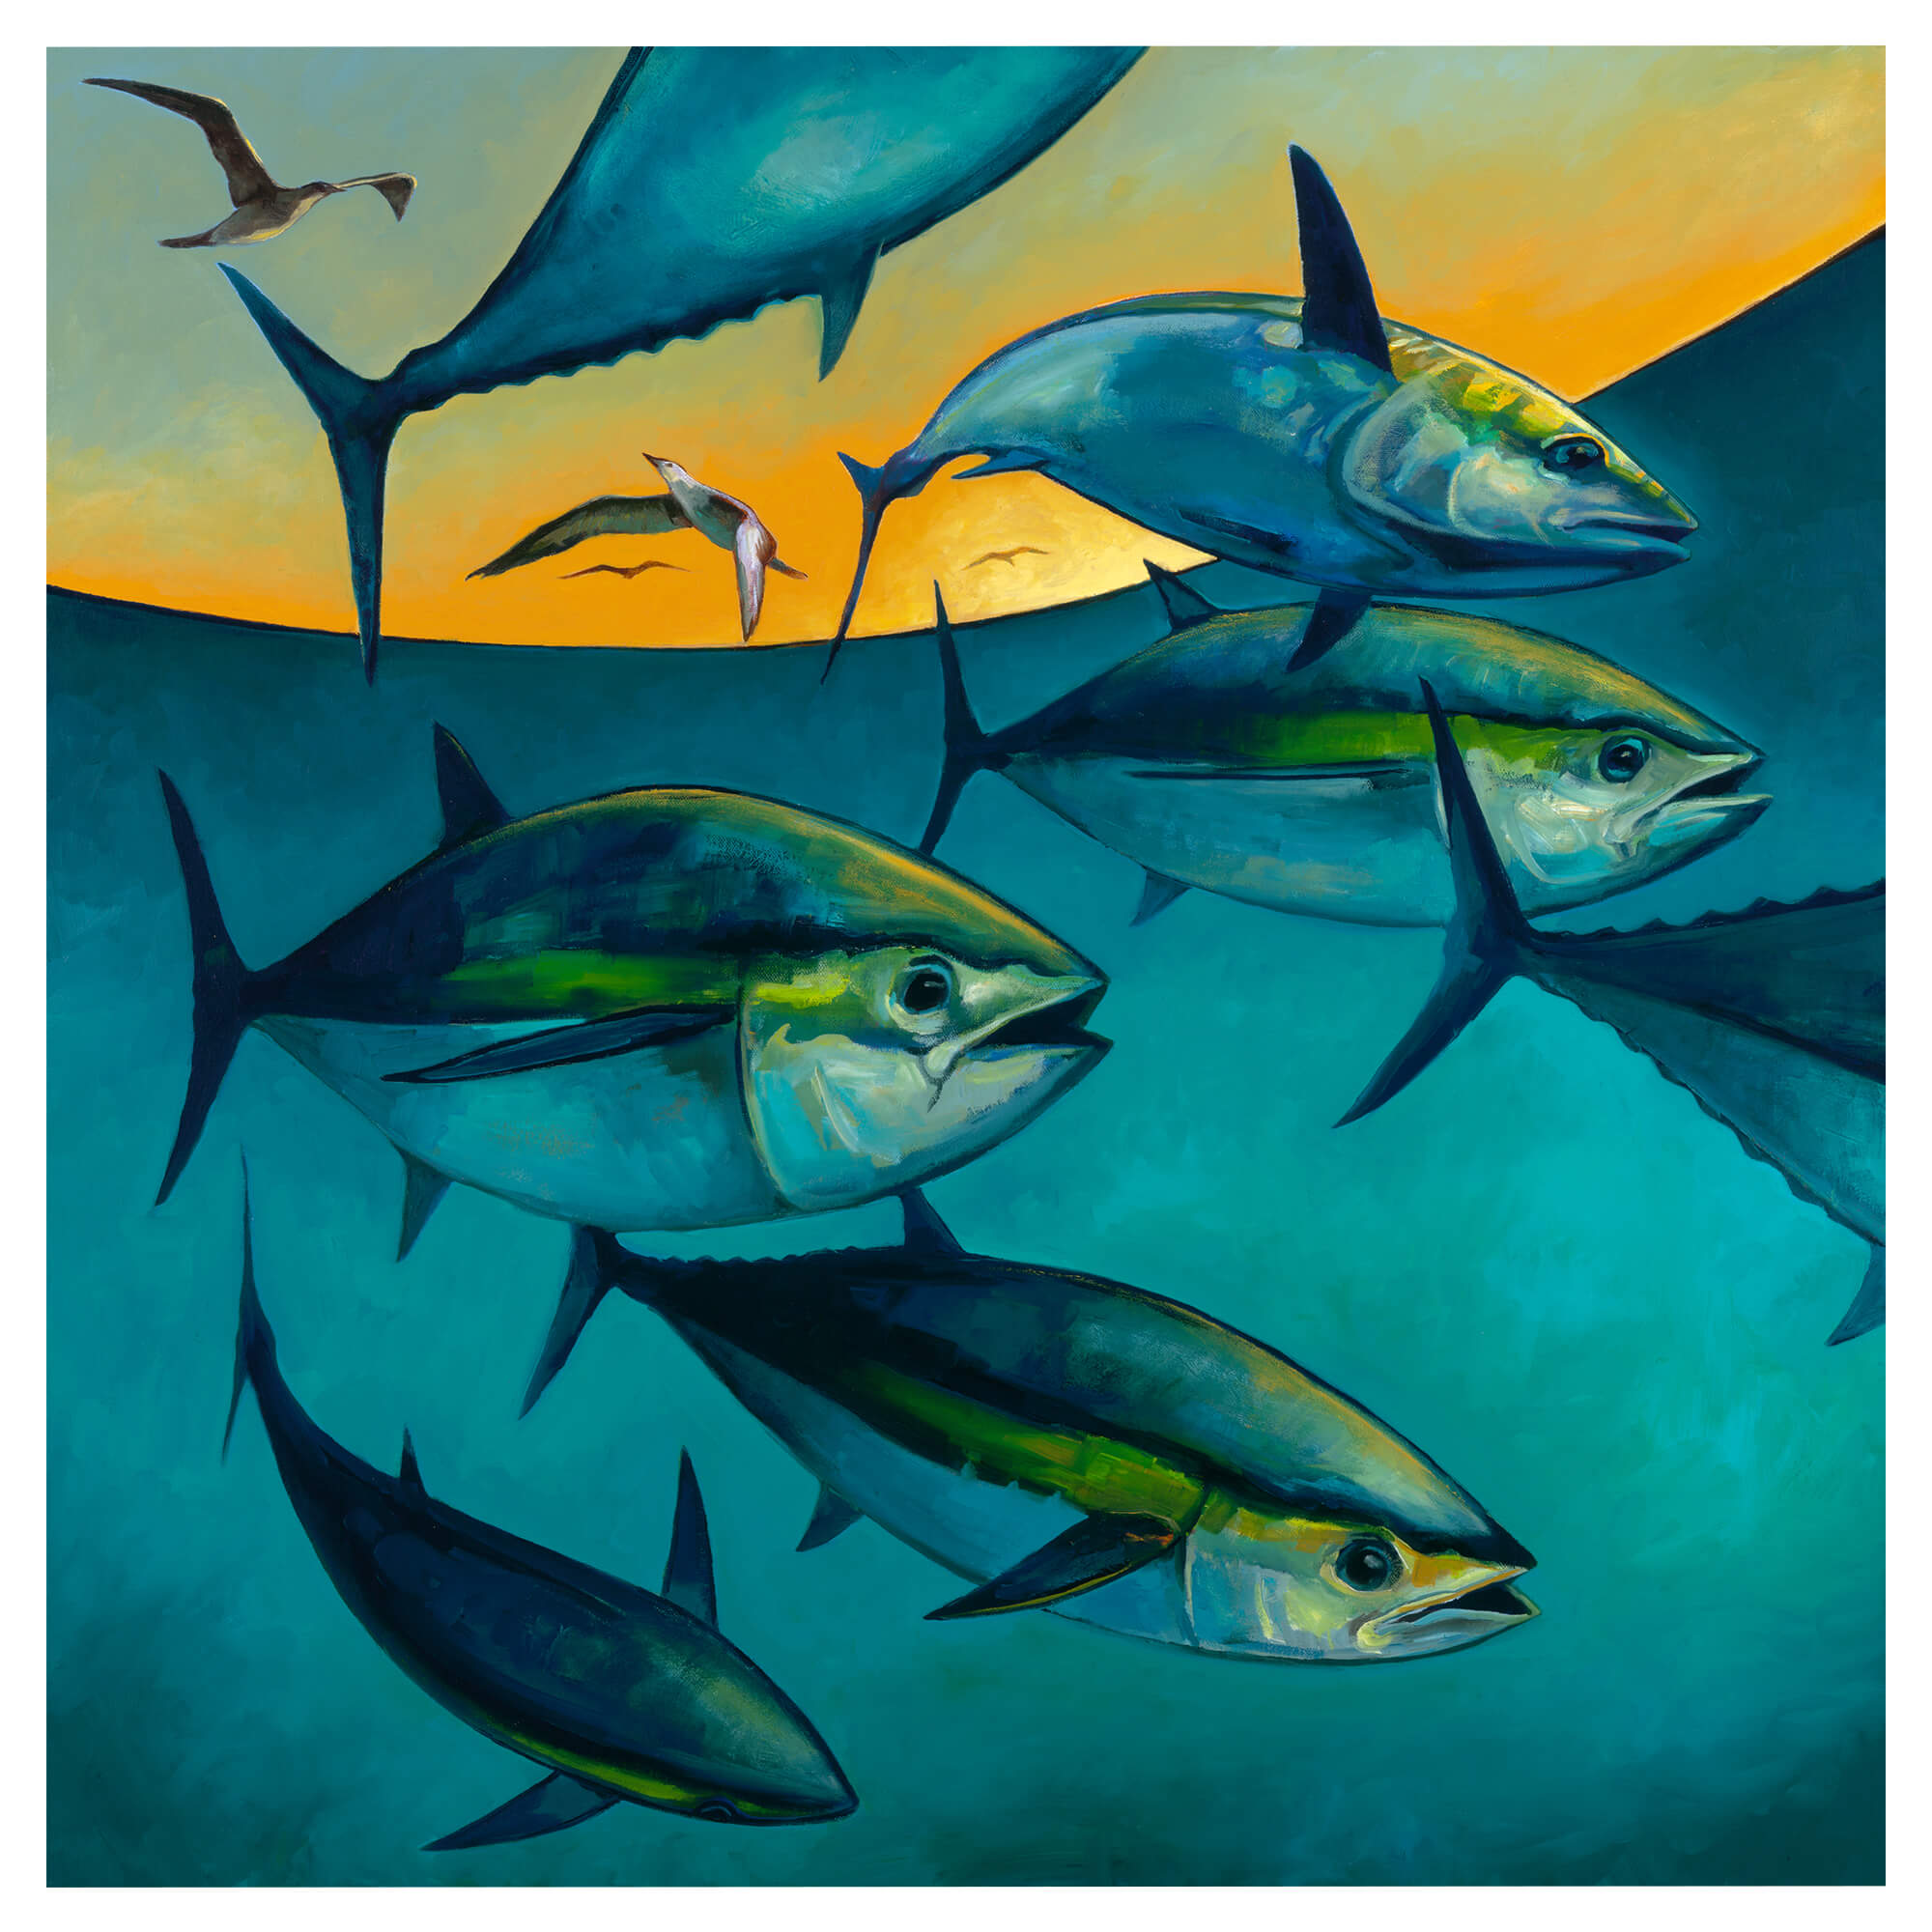 Tuna fish under water and birds flying above by Hawaii artist Colin Redican